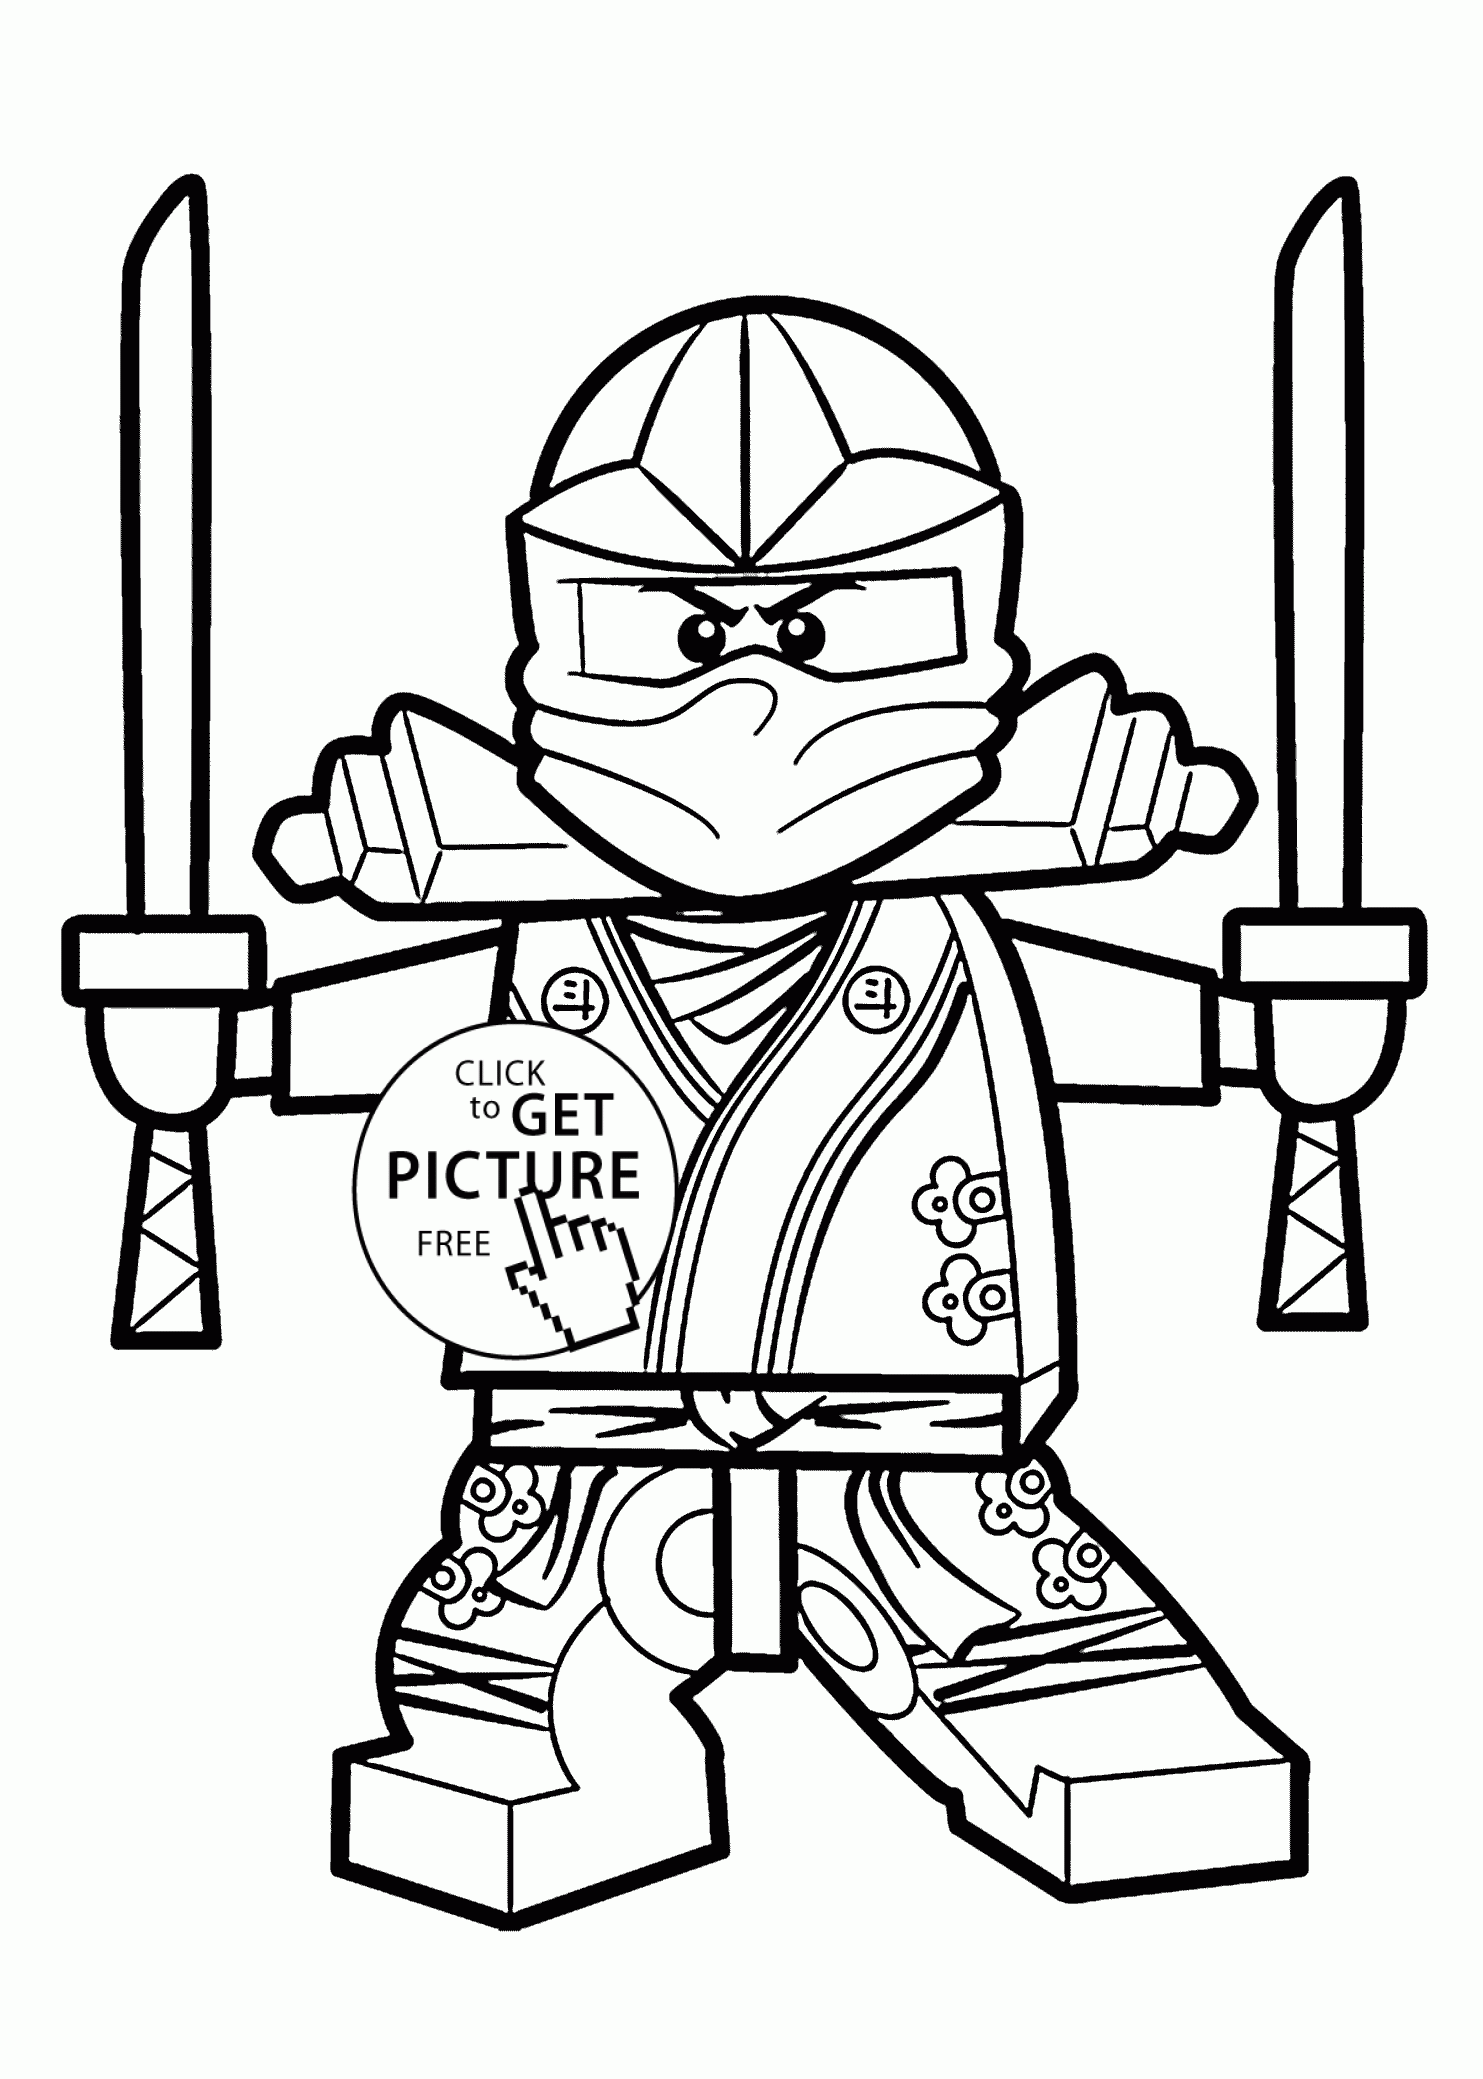 Step Ninja Coloring Pages To Download And Print For Free - Widetheme